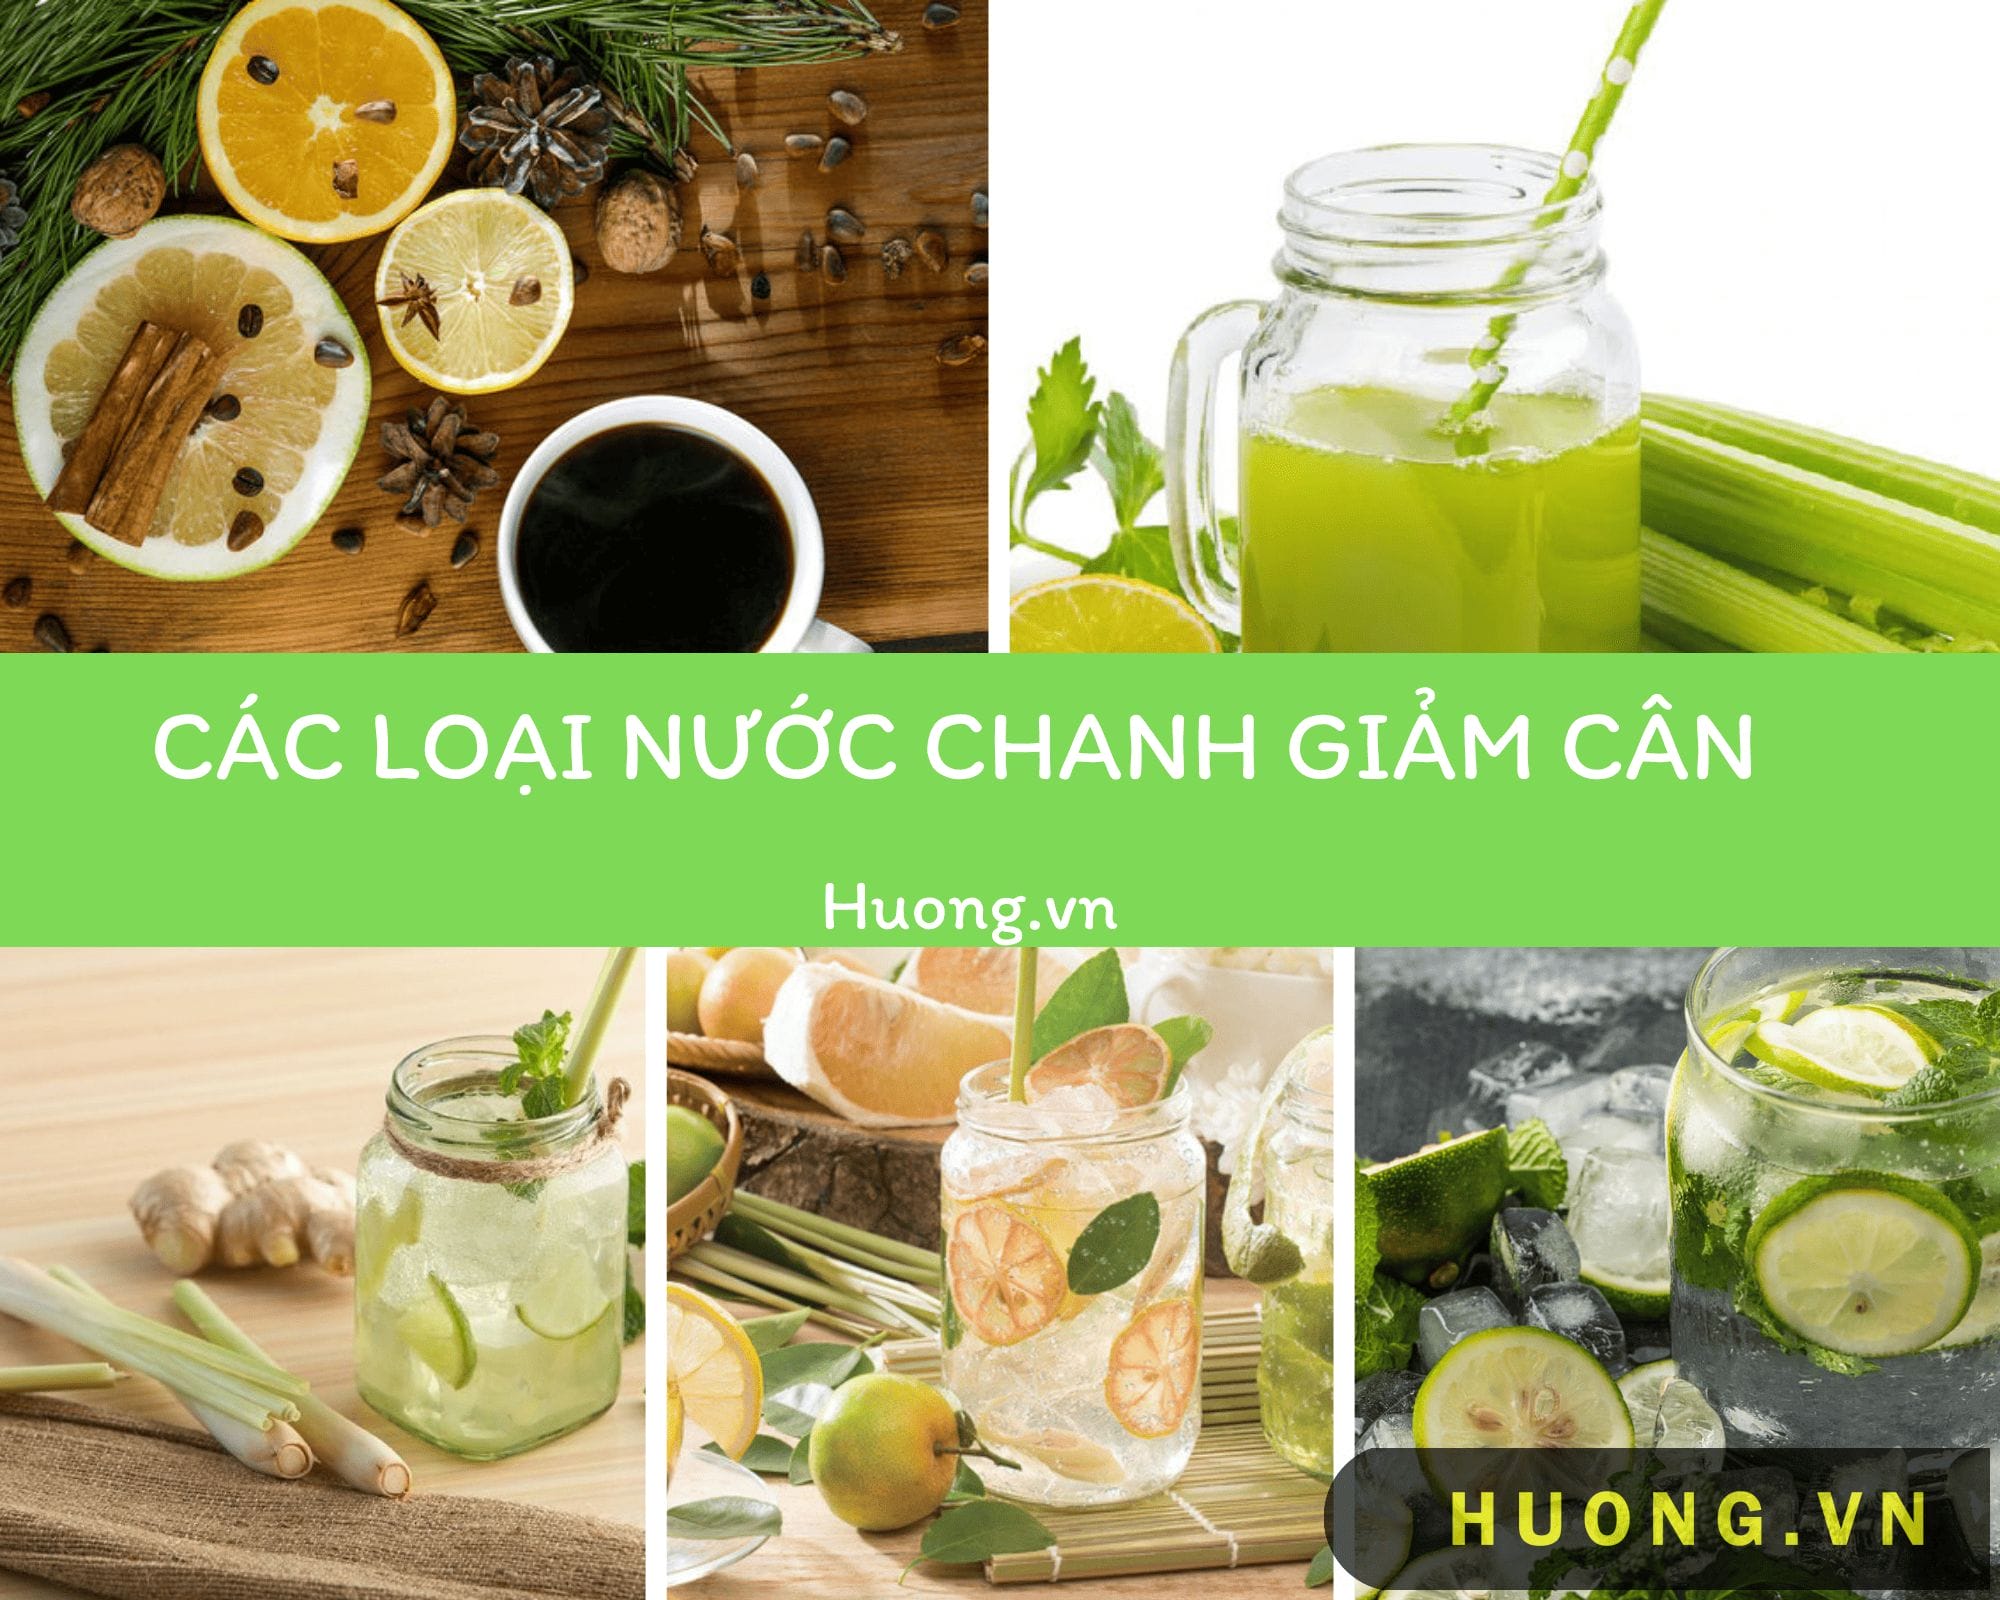 uong nuoc chanh co giam can khong.7 1